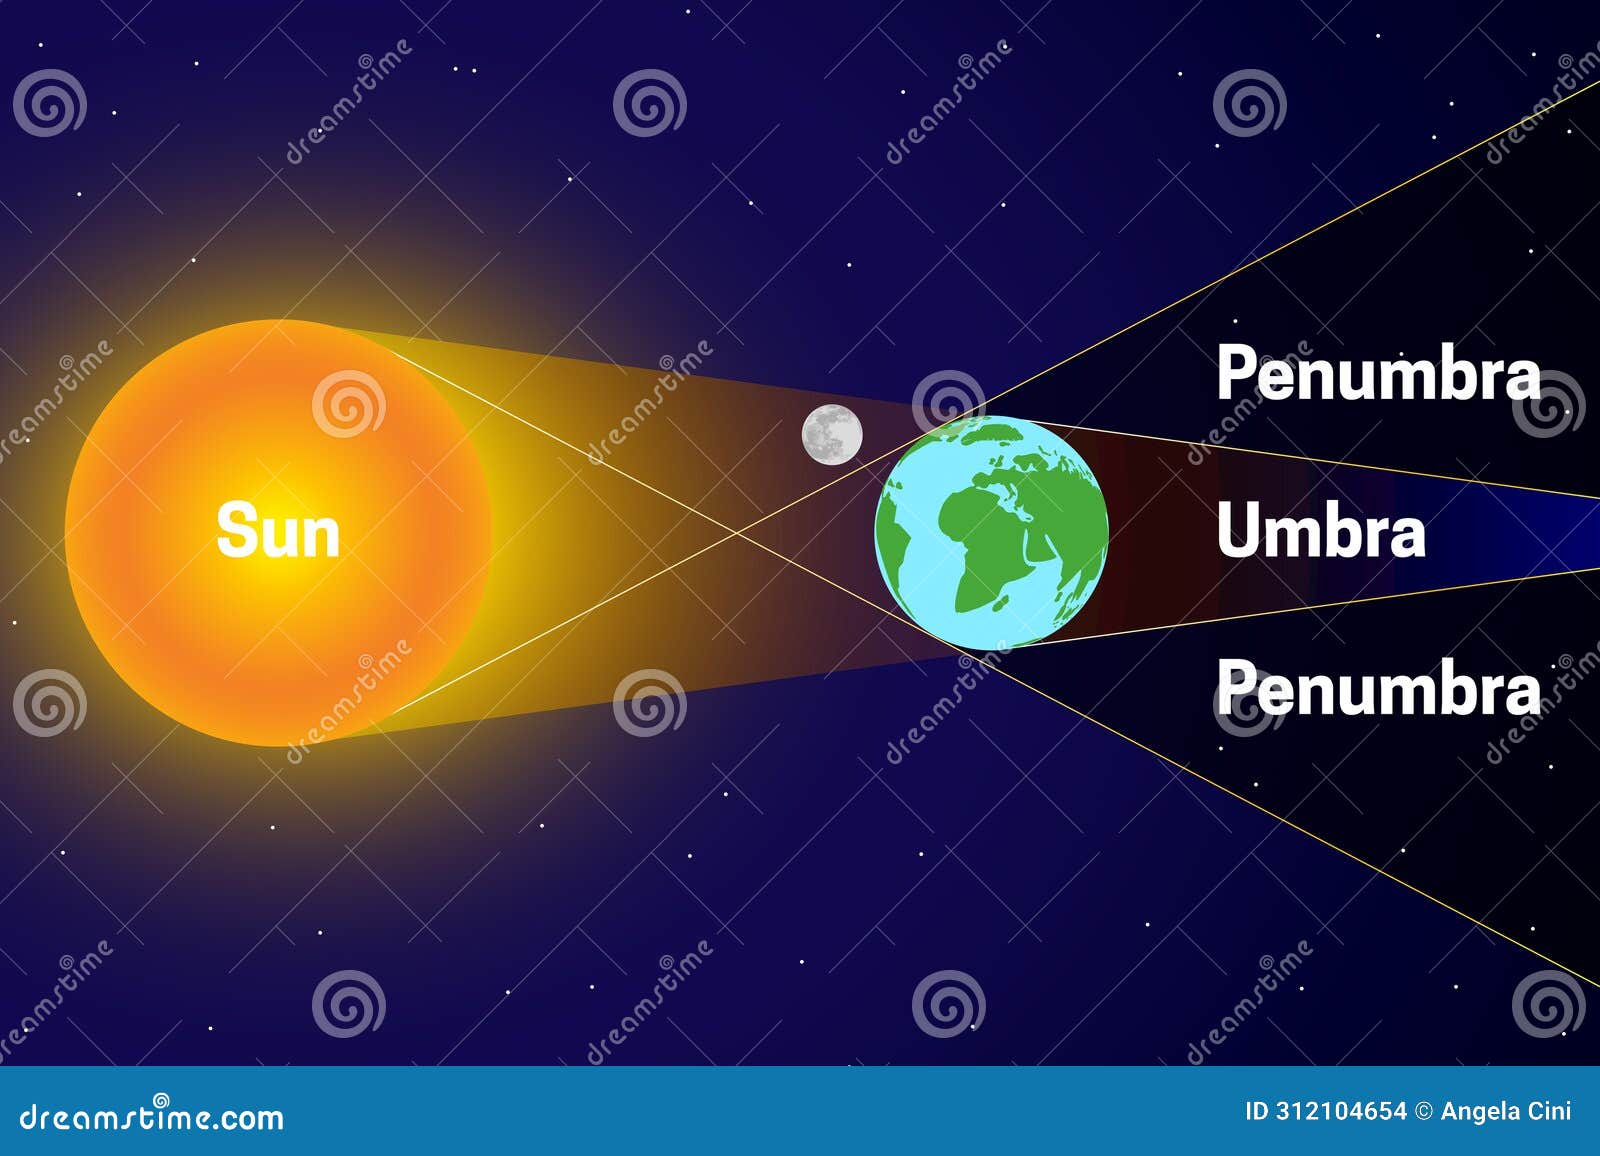 penumbra and umbra with sun, moon, earth space chart  or diagram